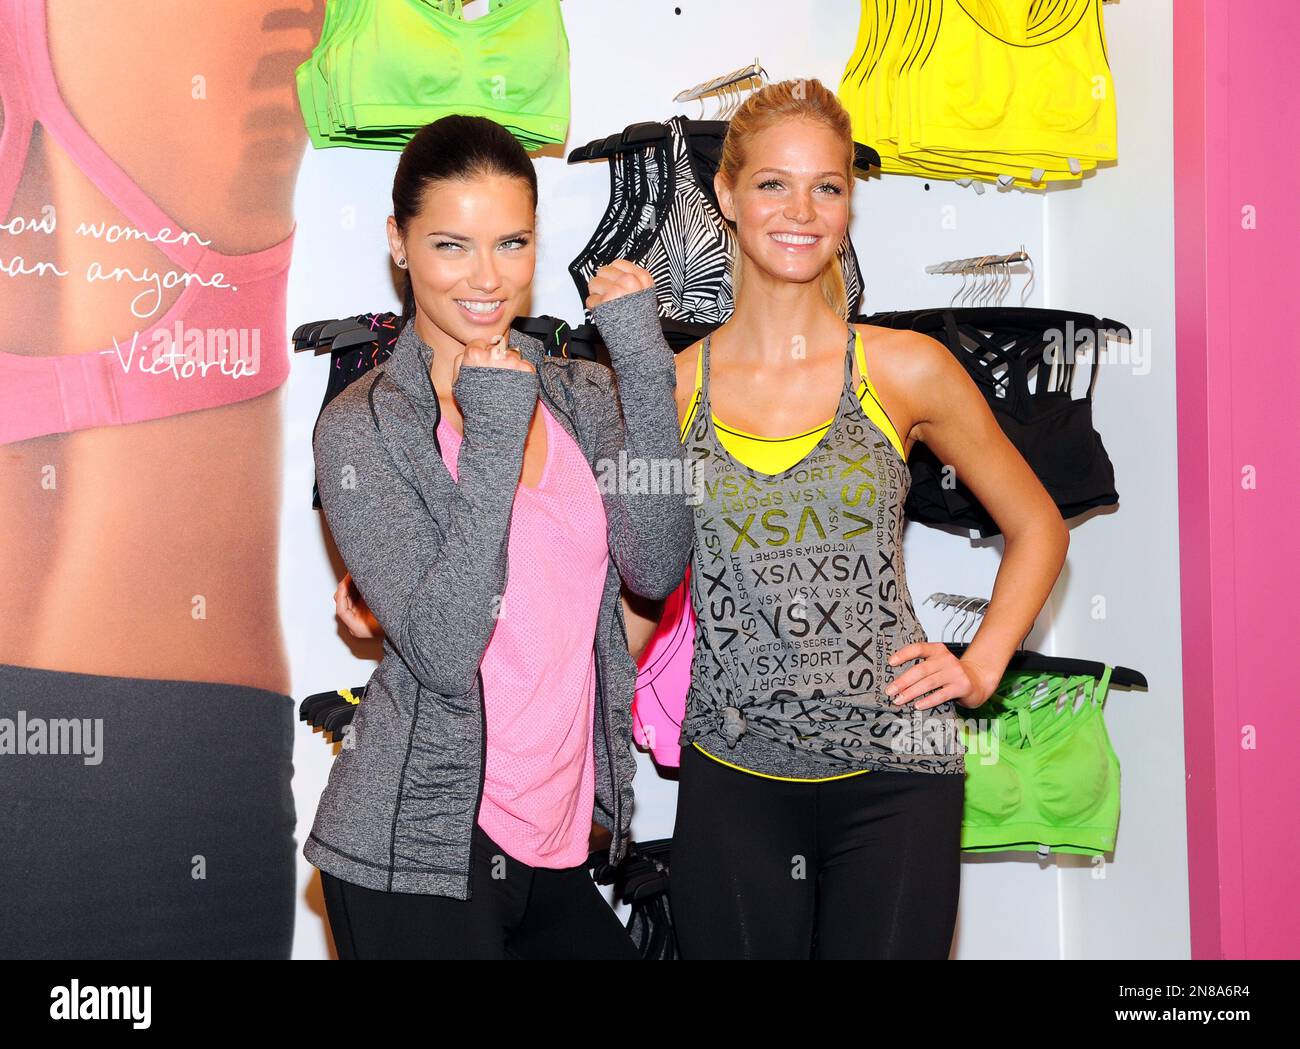 https://c8.alamy.com/comp/2N8A6R4/models-adriana-lima-left-and-erin-heatherton-pose-together-at-a-victorias-secret-vsx-sport-collection-launch-event-at-the-victorias-secret-herald-square-store-on-tuesday-jan-15-2013-in-new-york-photo-by-evan-agostiniinvisionap-2N8A6R4.jpg